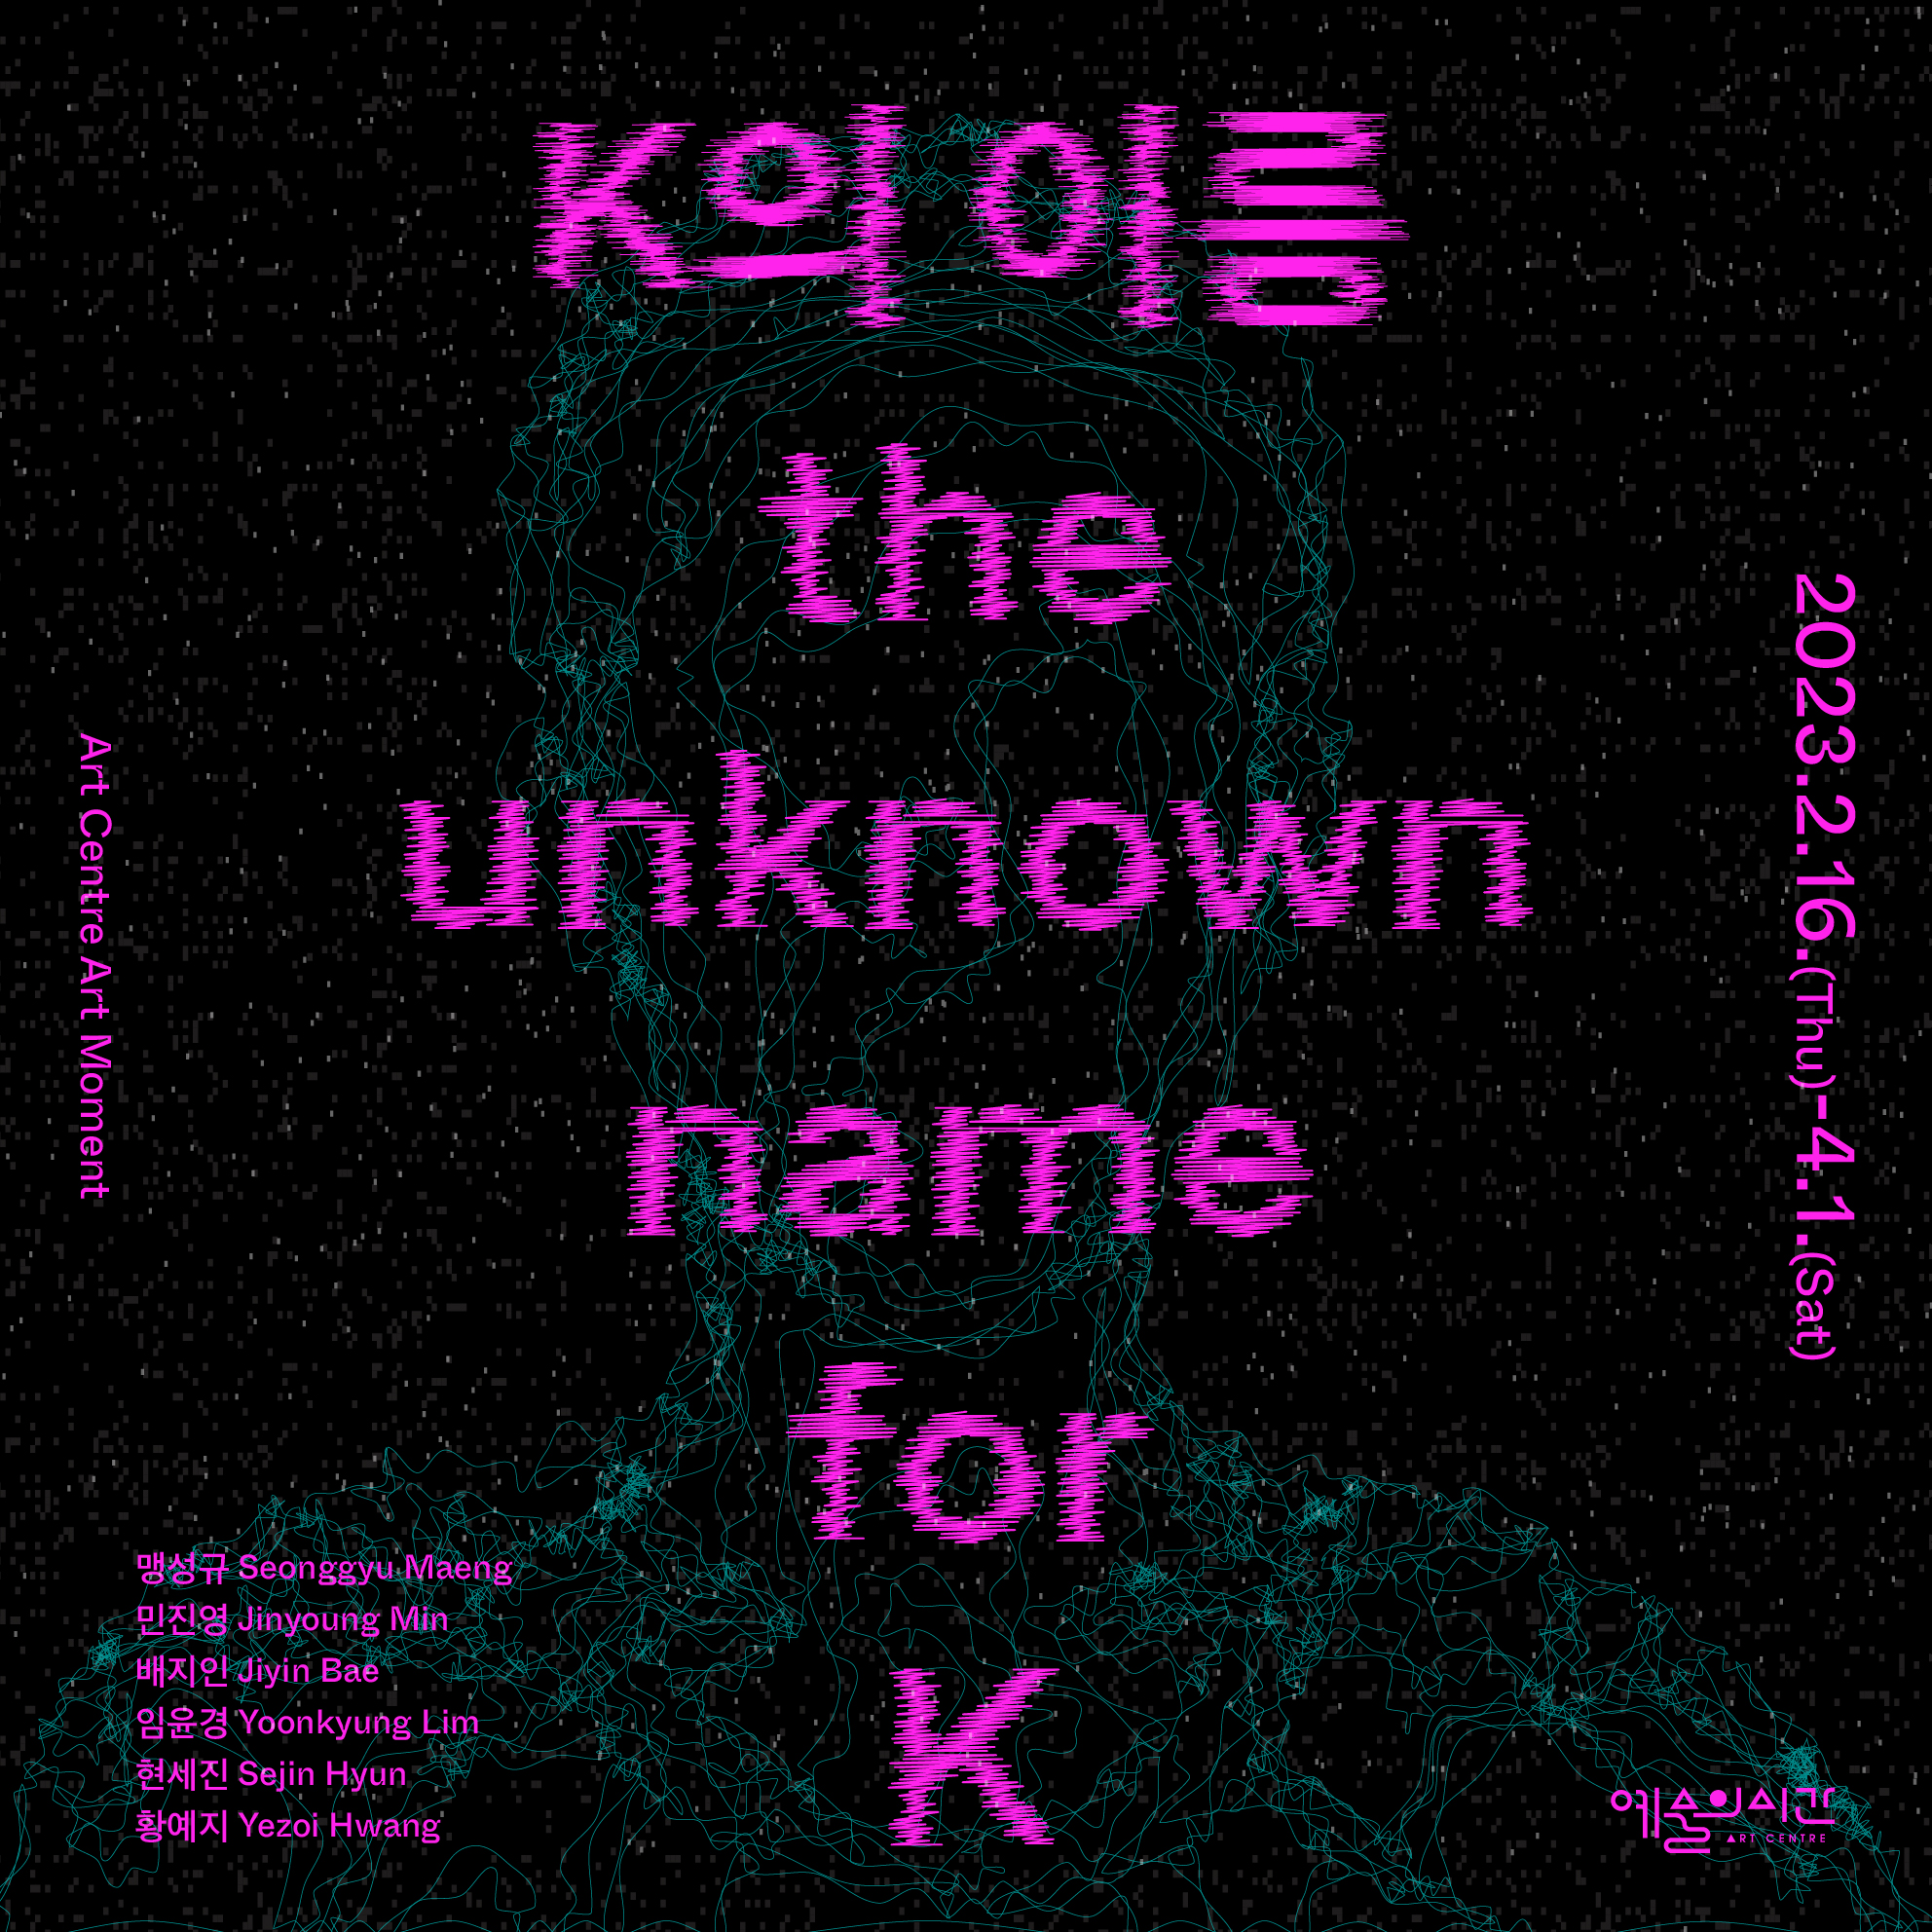 K의 이름 the unknown name for K